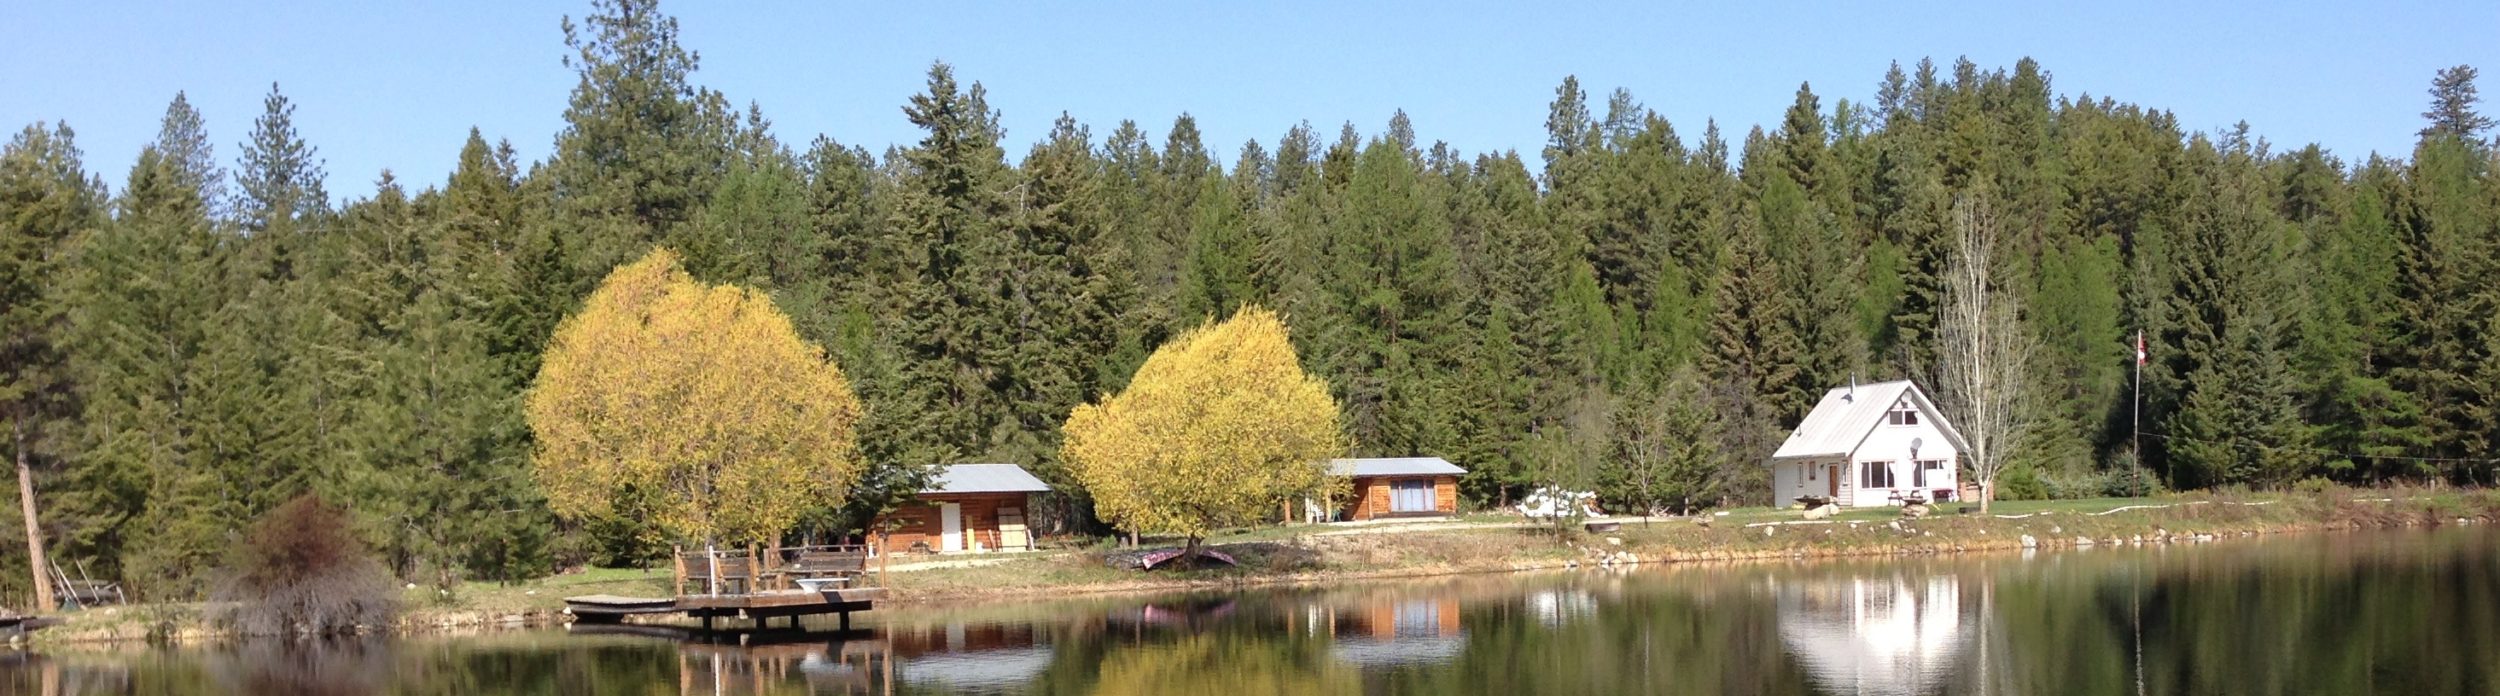 OWLSROOST CABINS AND TREE FARM